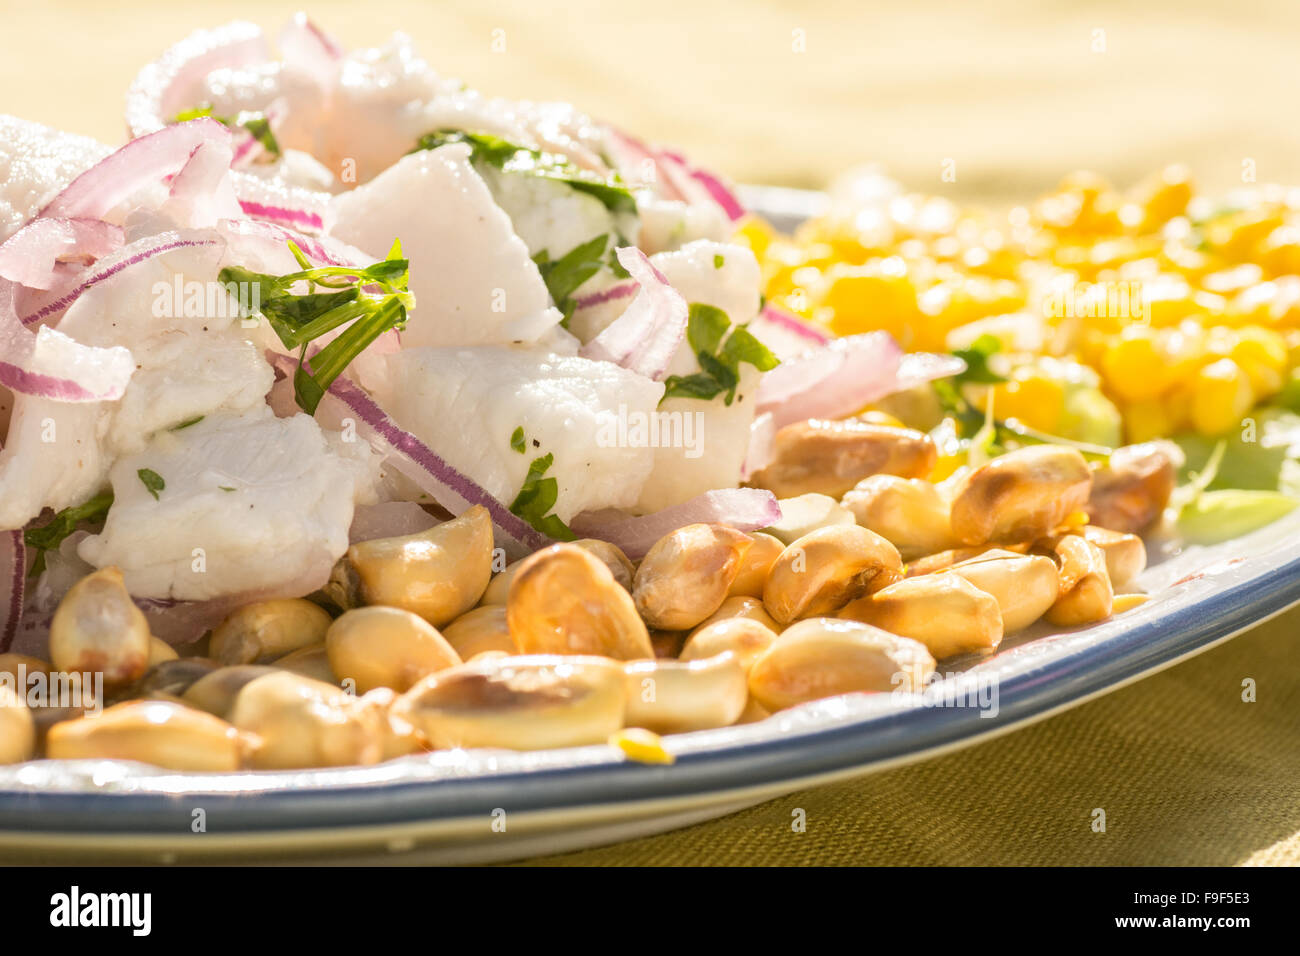 Close-up of typical Peruvian dish of Fish Ceviche with Cancha (toasted maize) Stock Photo